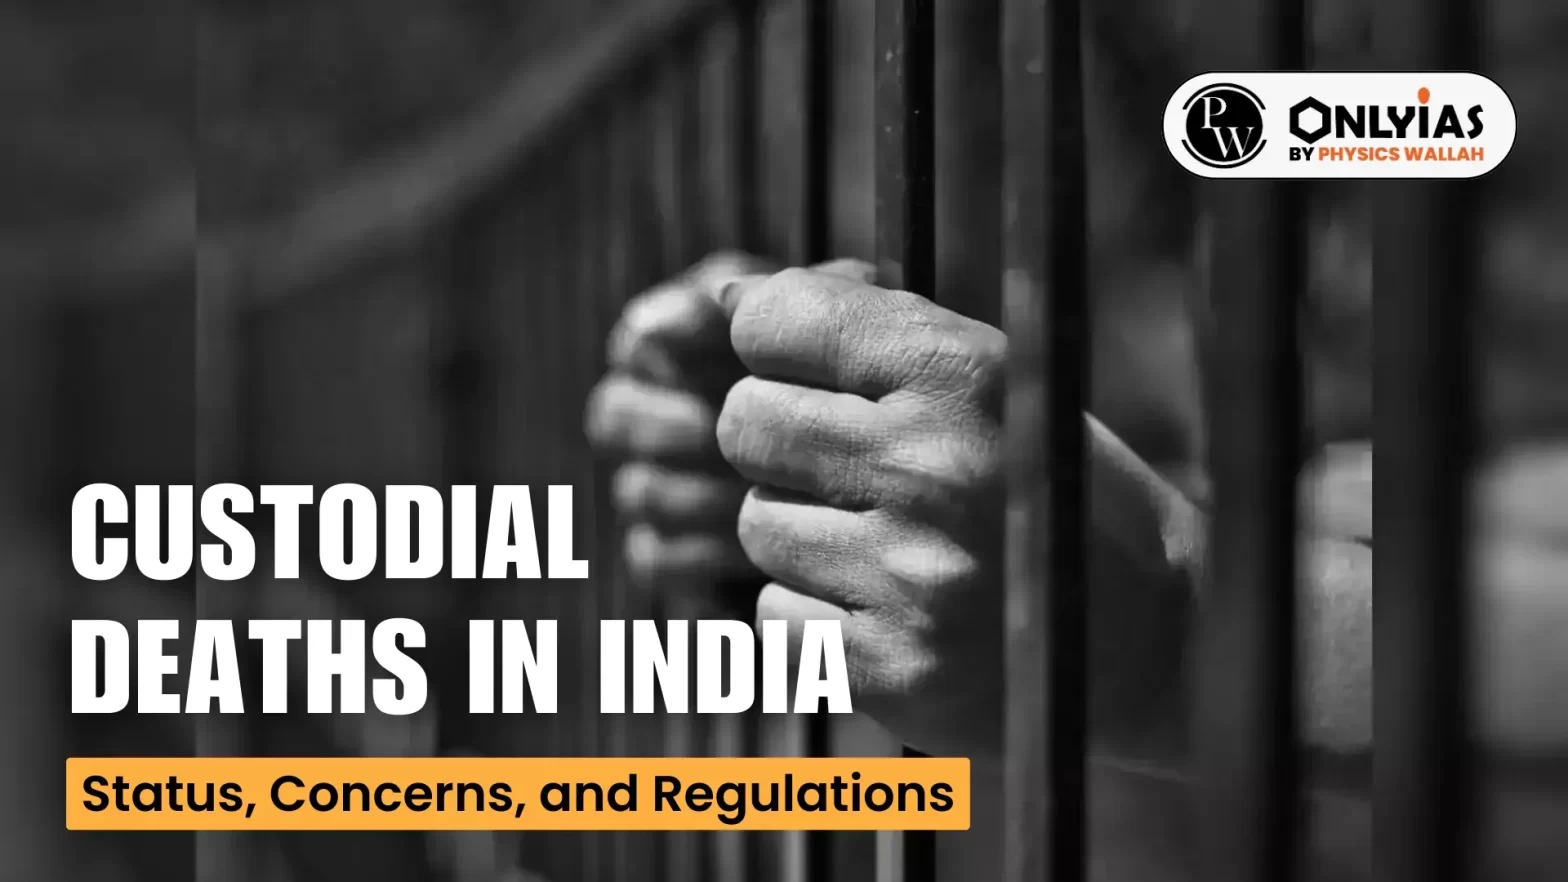 Custodial Deaths in India: Status, Concerns, and Regulations